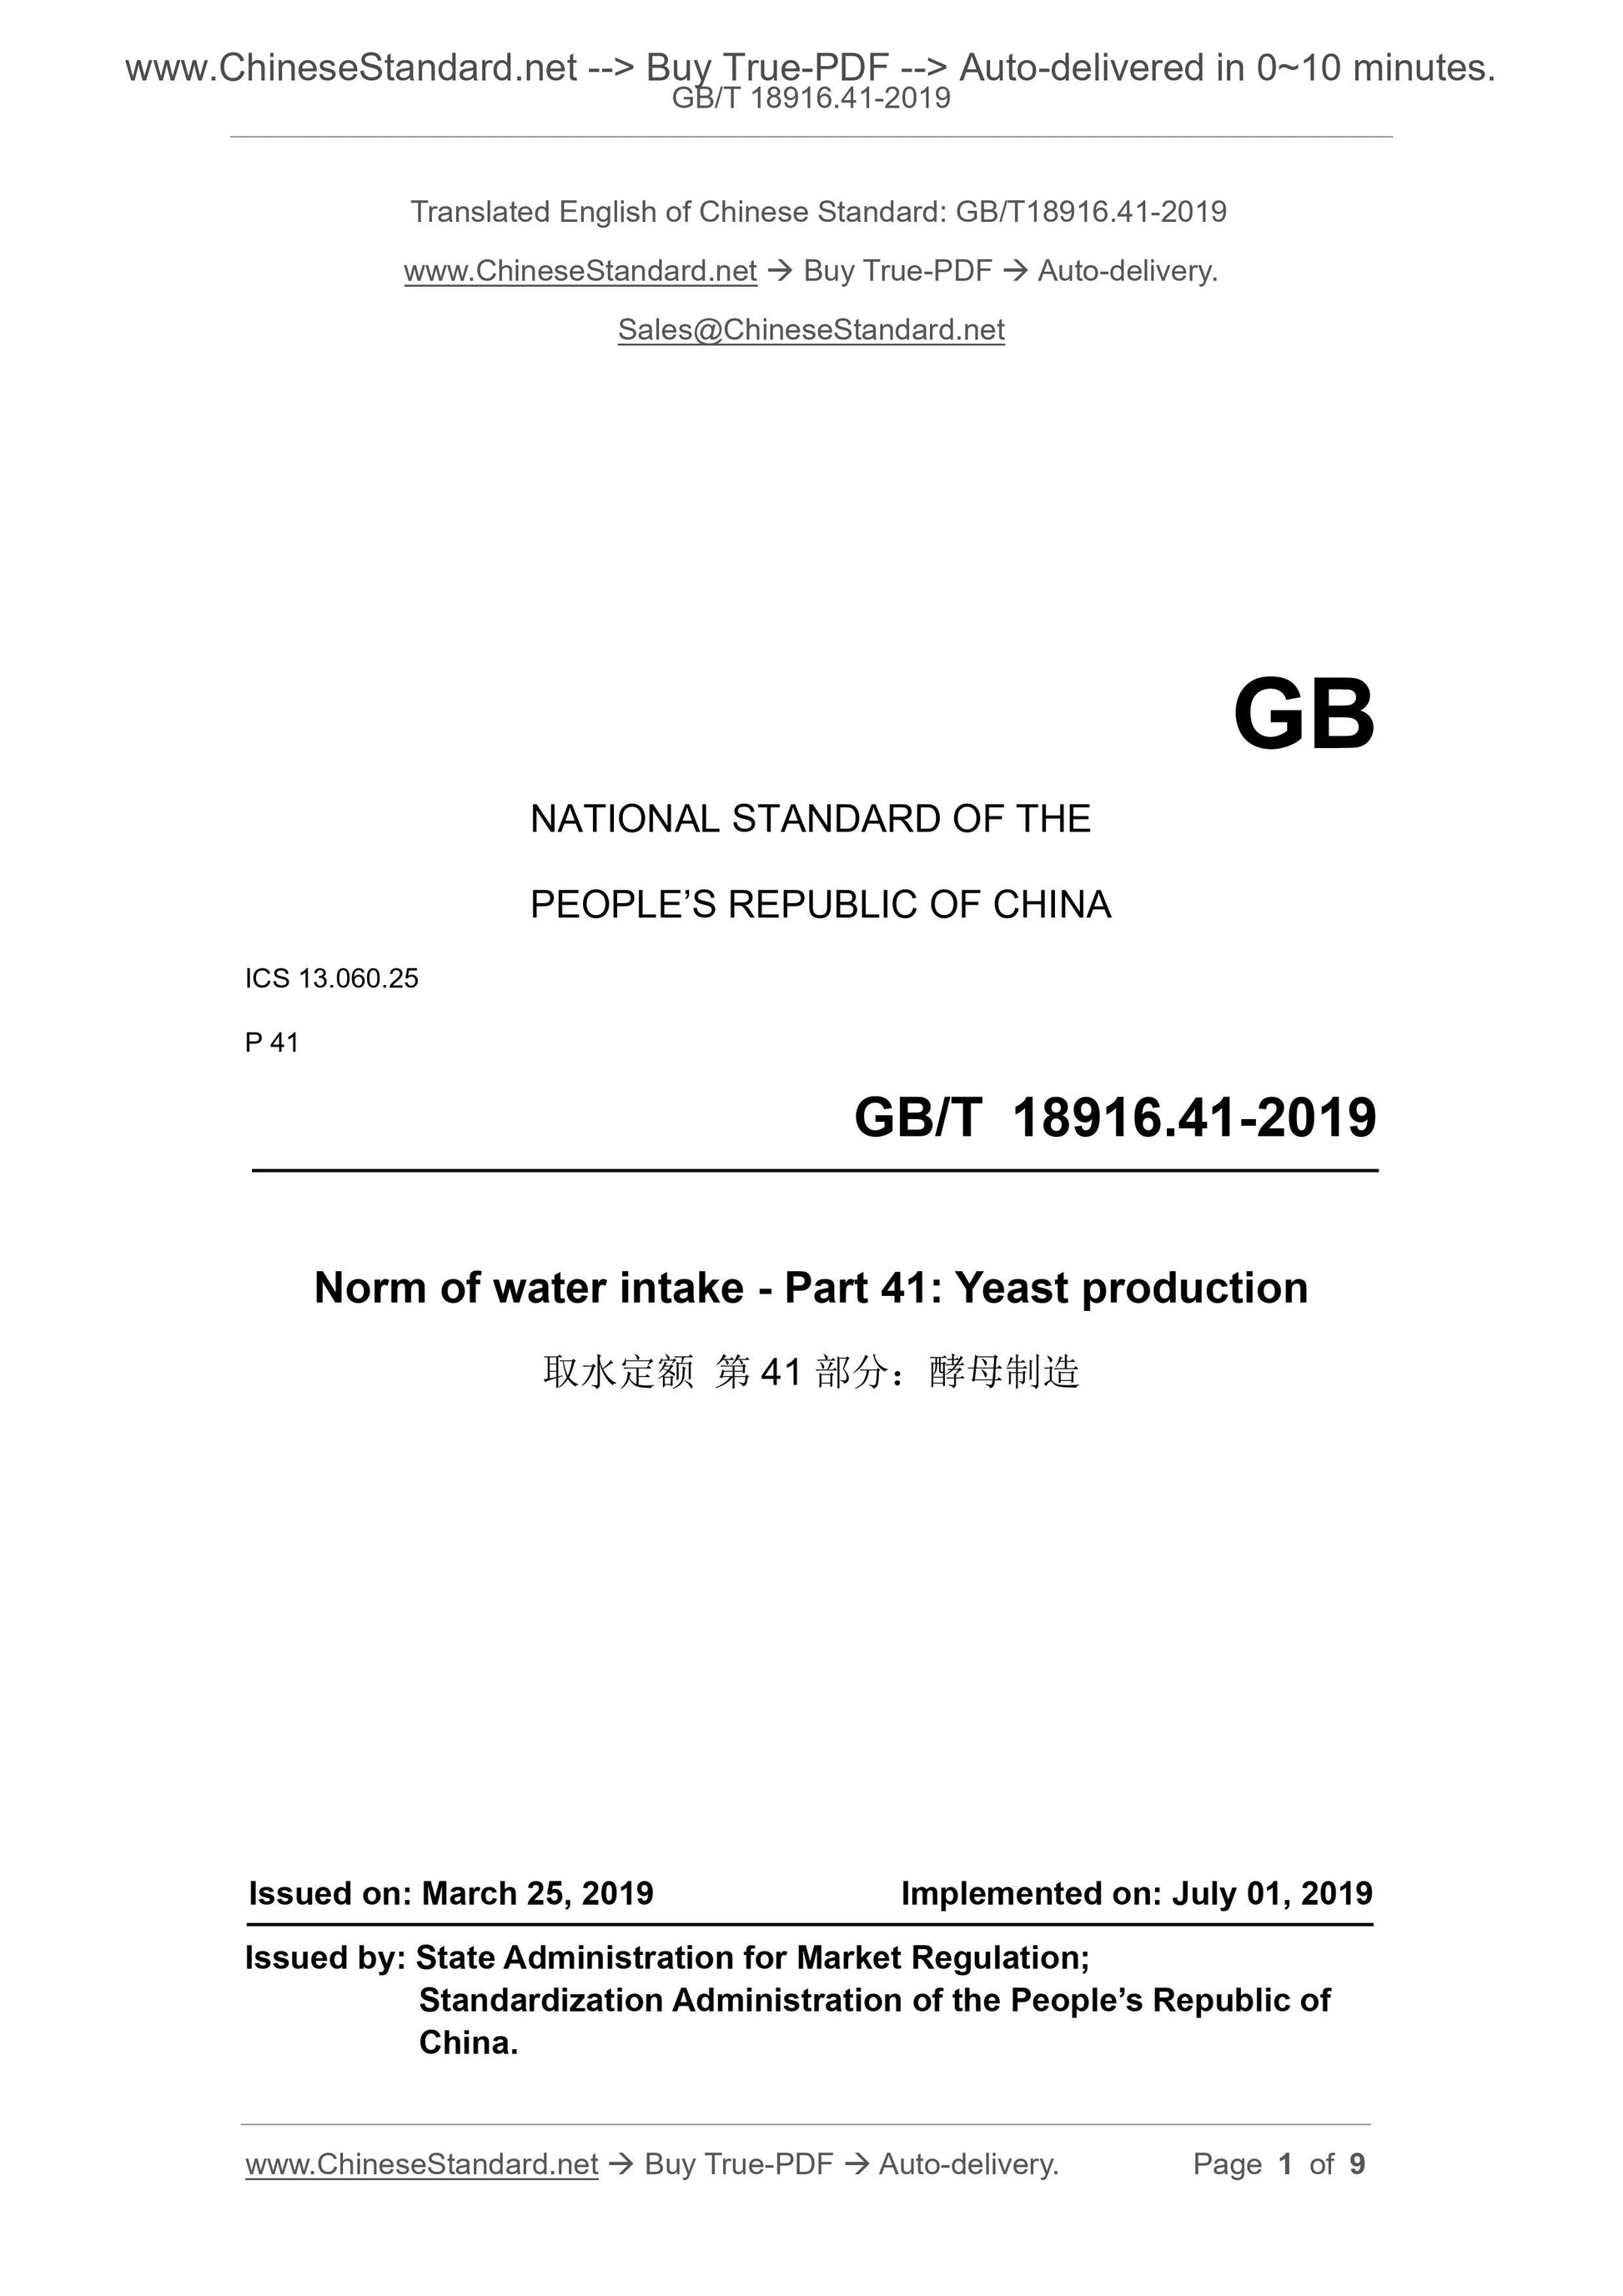 GB/T 18916.41-2019 Page 1